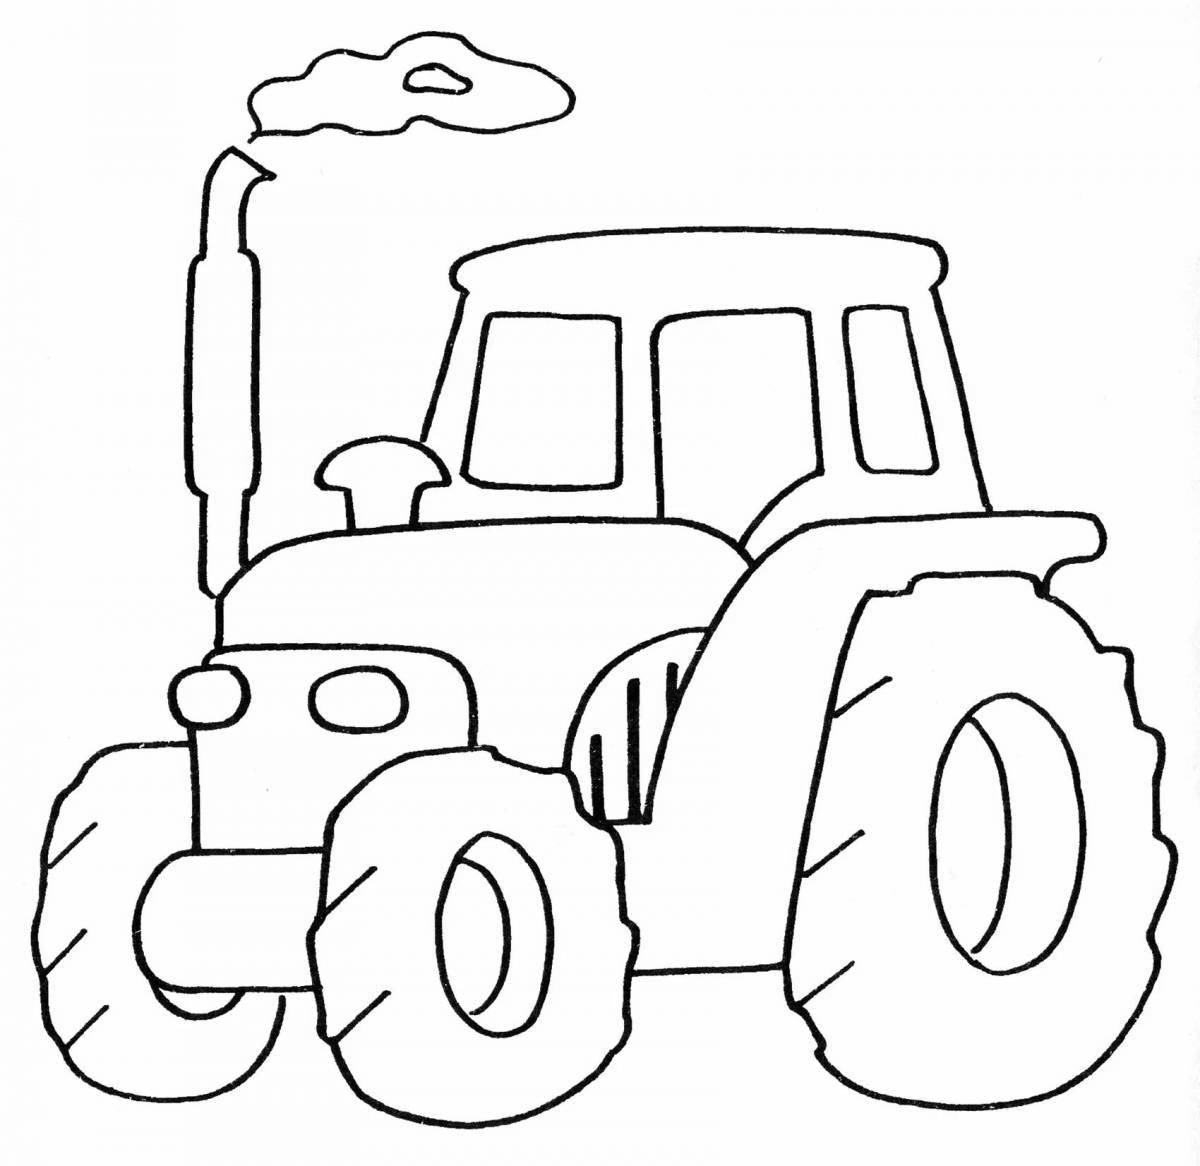 Coloring page joyful two year old tractor